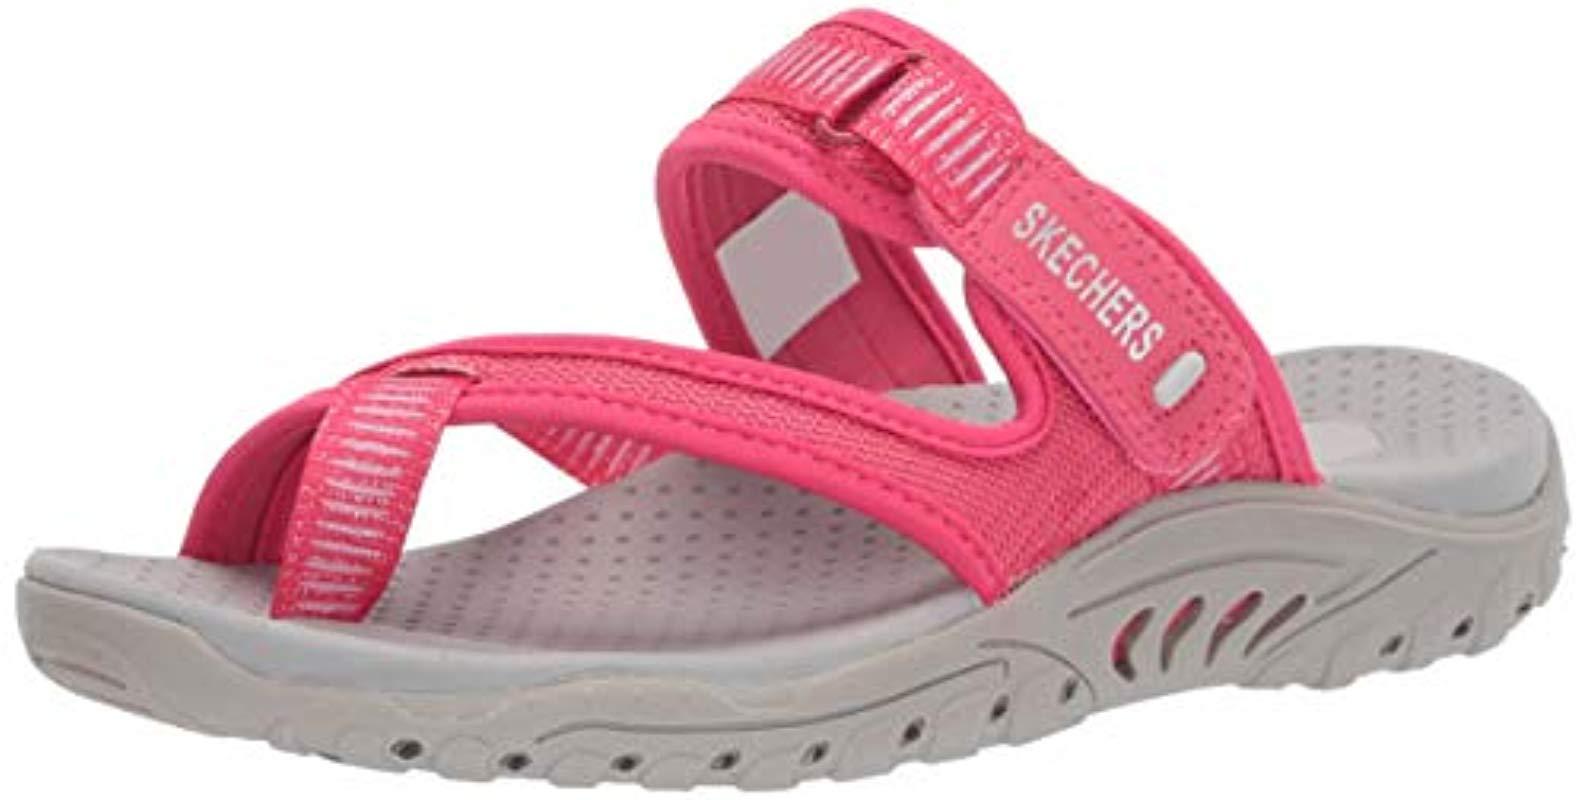 Skechers Synthetic Reggae-Seize The Day-toe Thong Sandal Flip-flop in